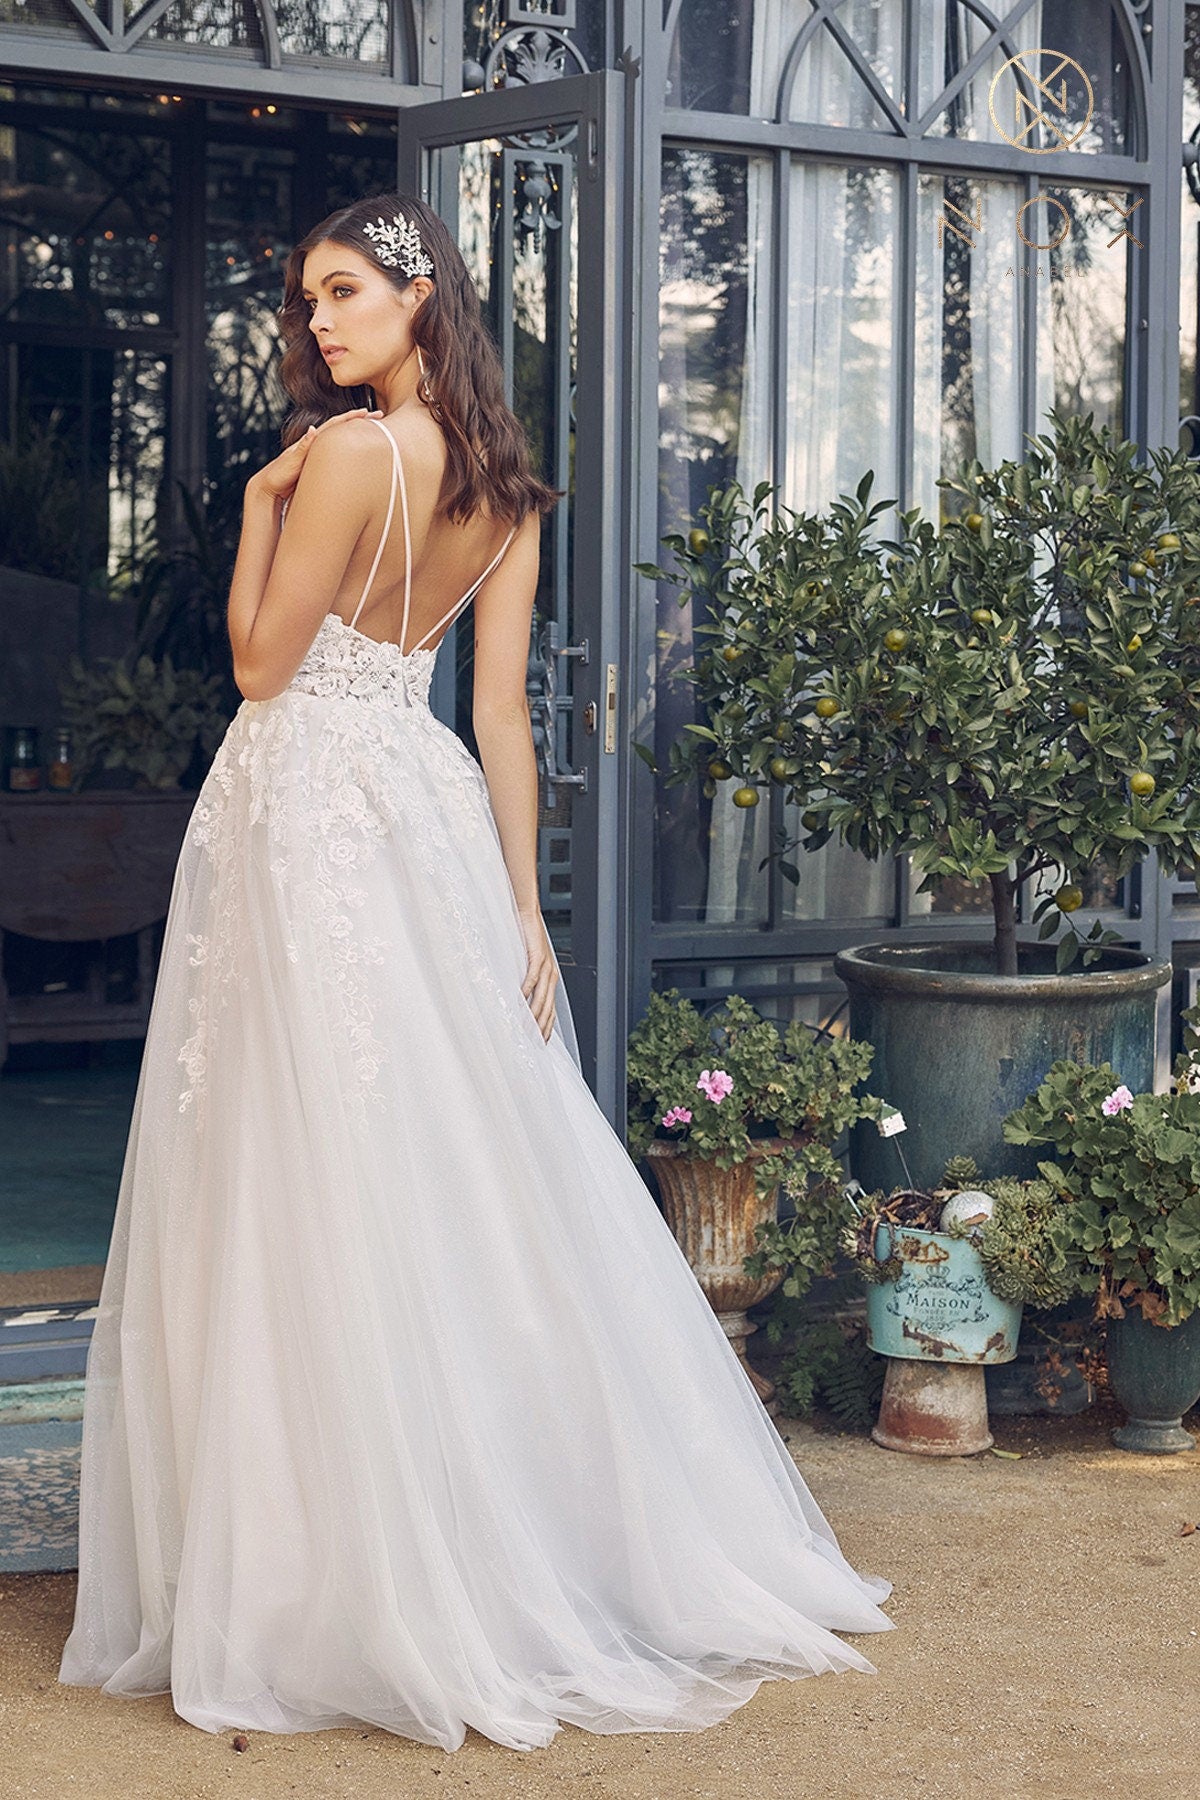 Timeless Classic Sleeveless Aline Wedding Dress Plunge Neckline Bridal Gown Open Back Straps Floral Lace Quick Ship